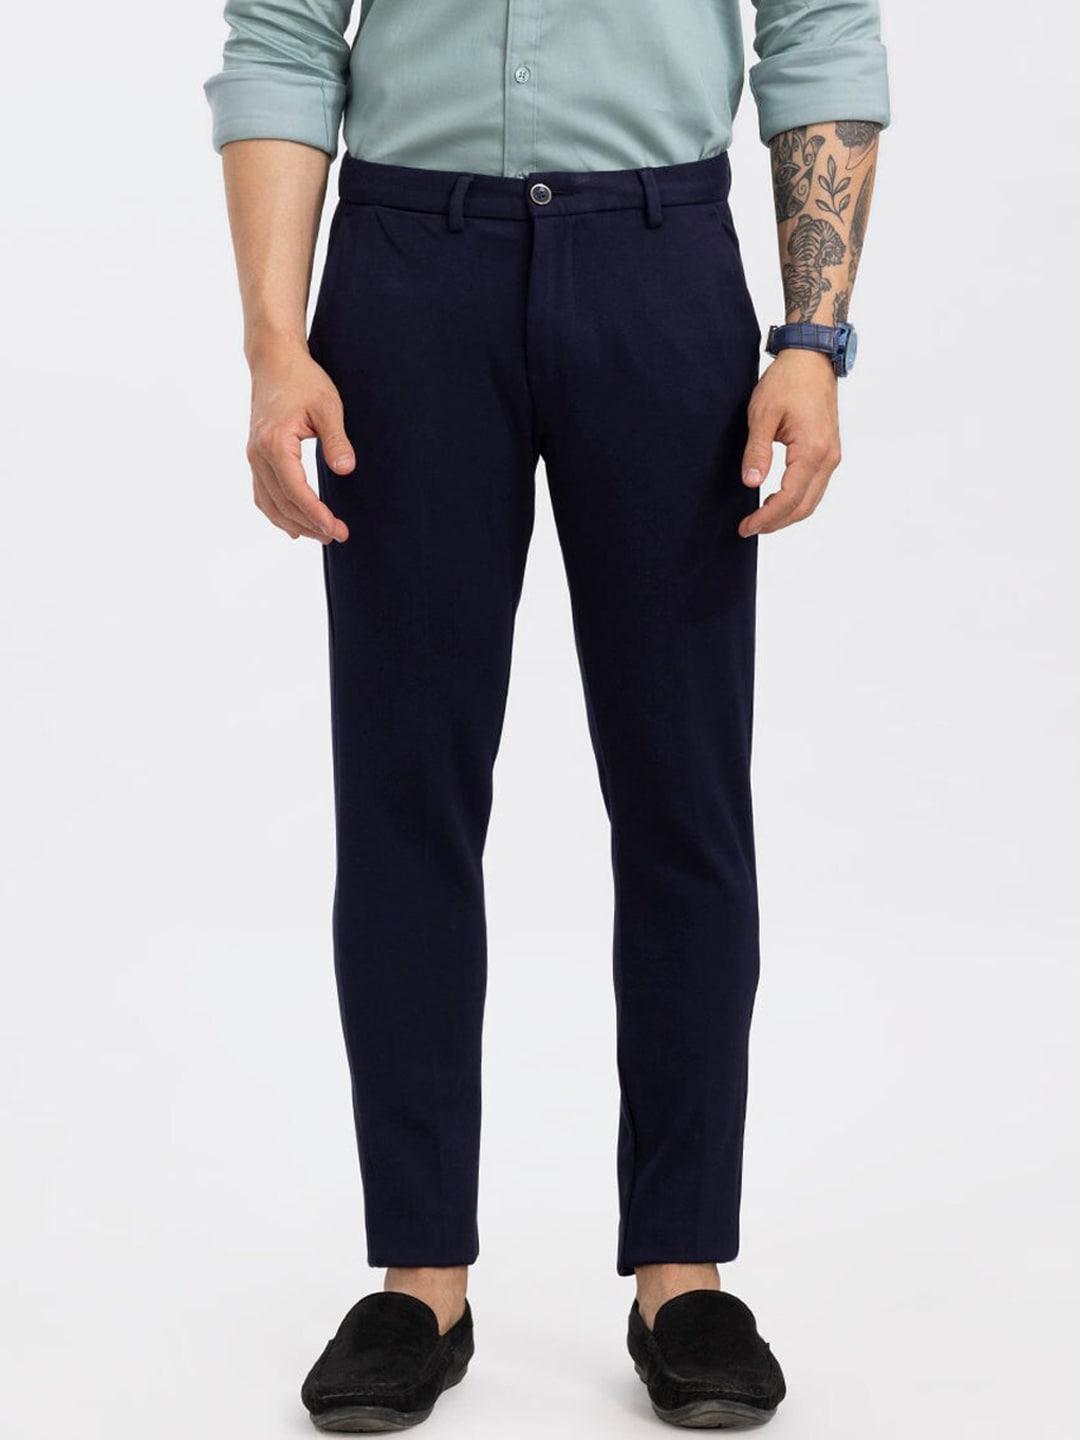 snitch-navy-blue-smart-mid-rise-plain-cotton-chinos